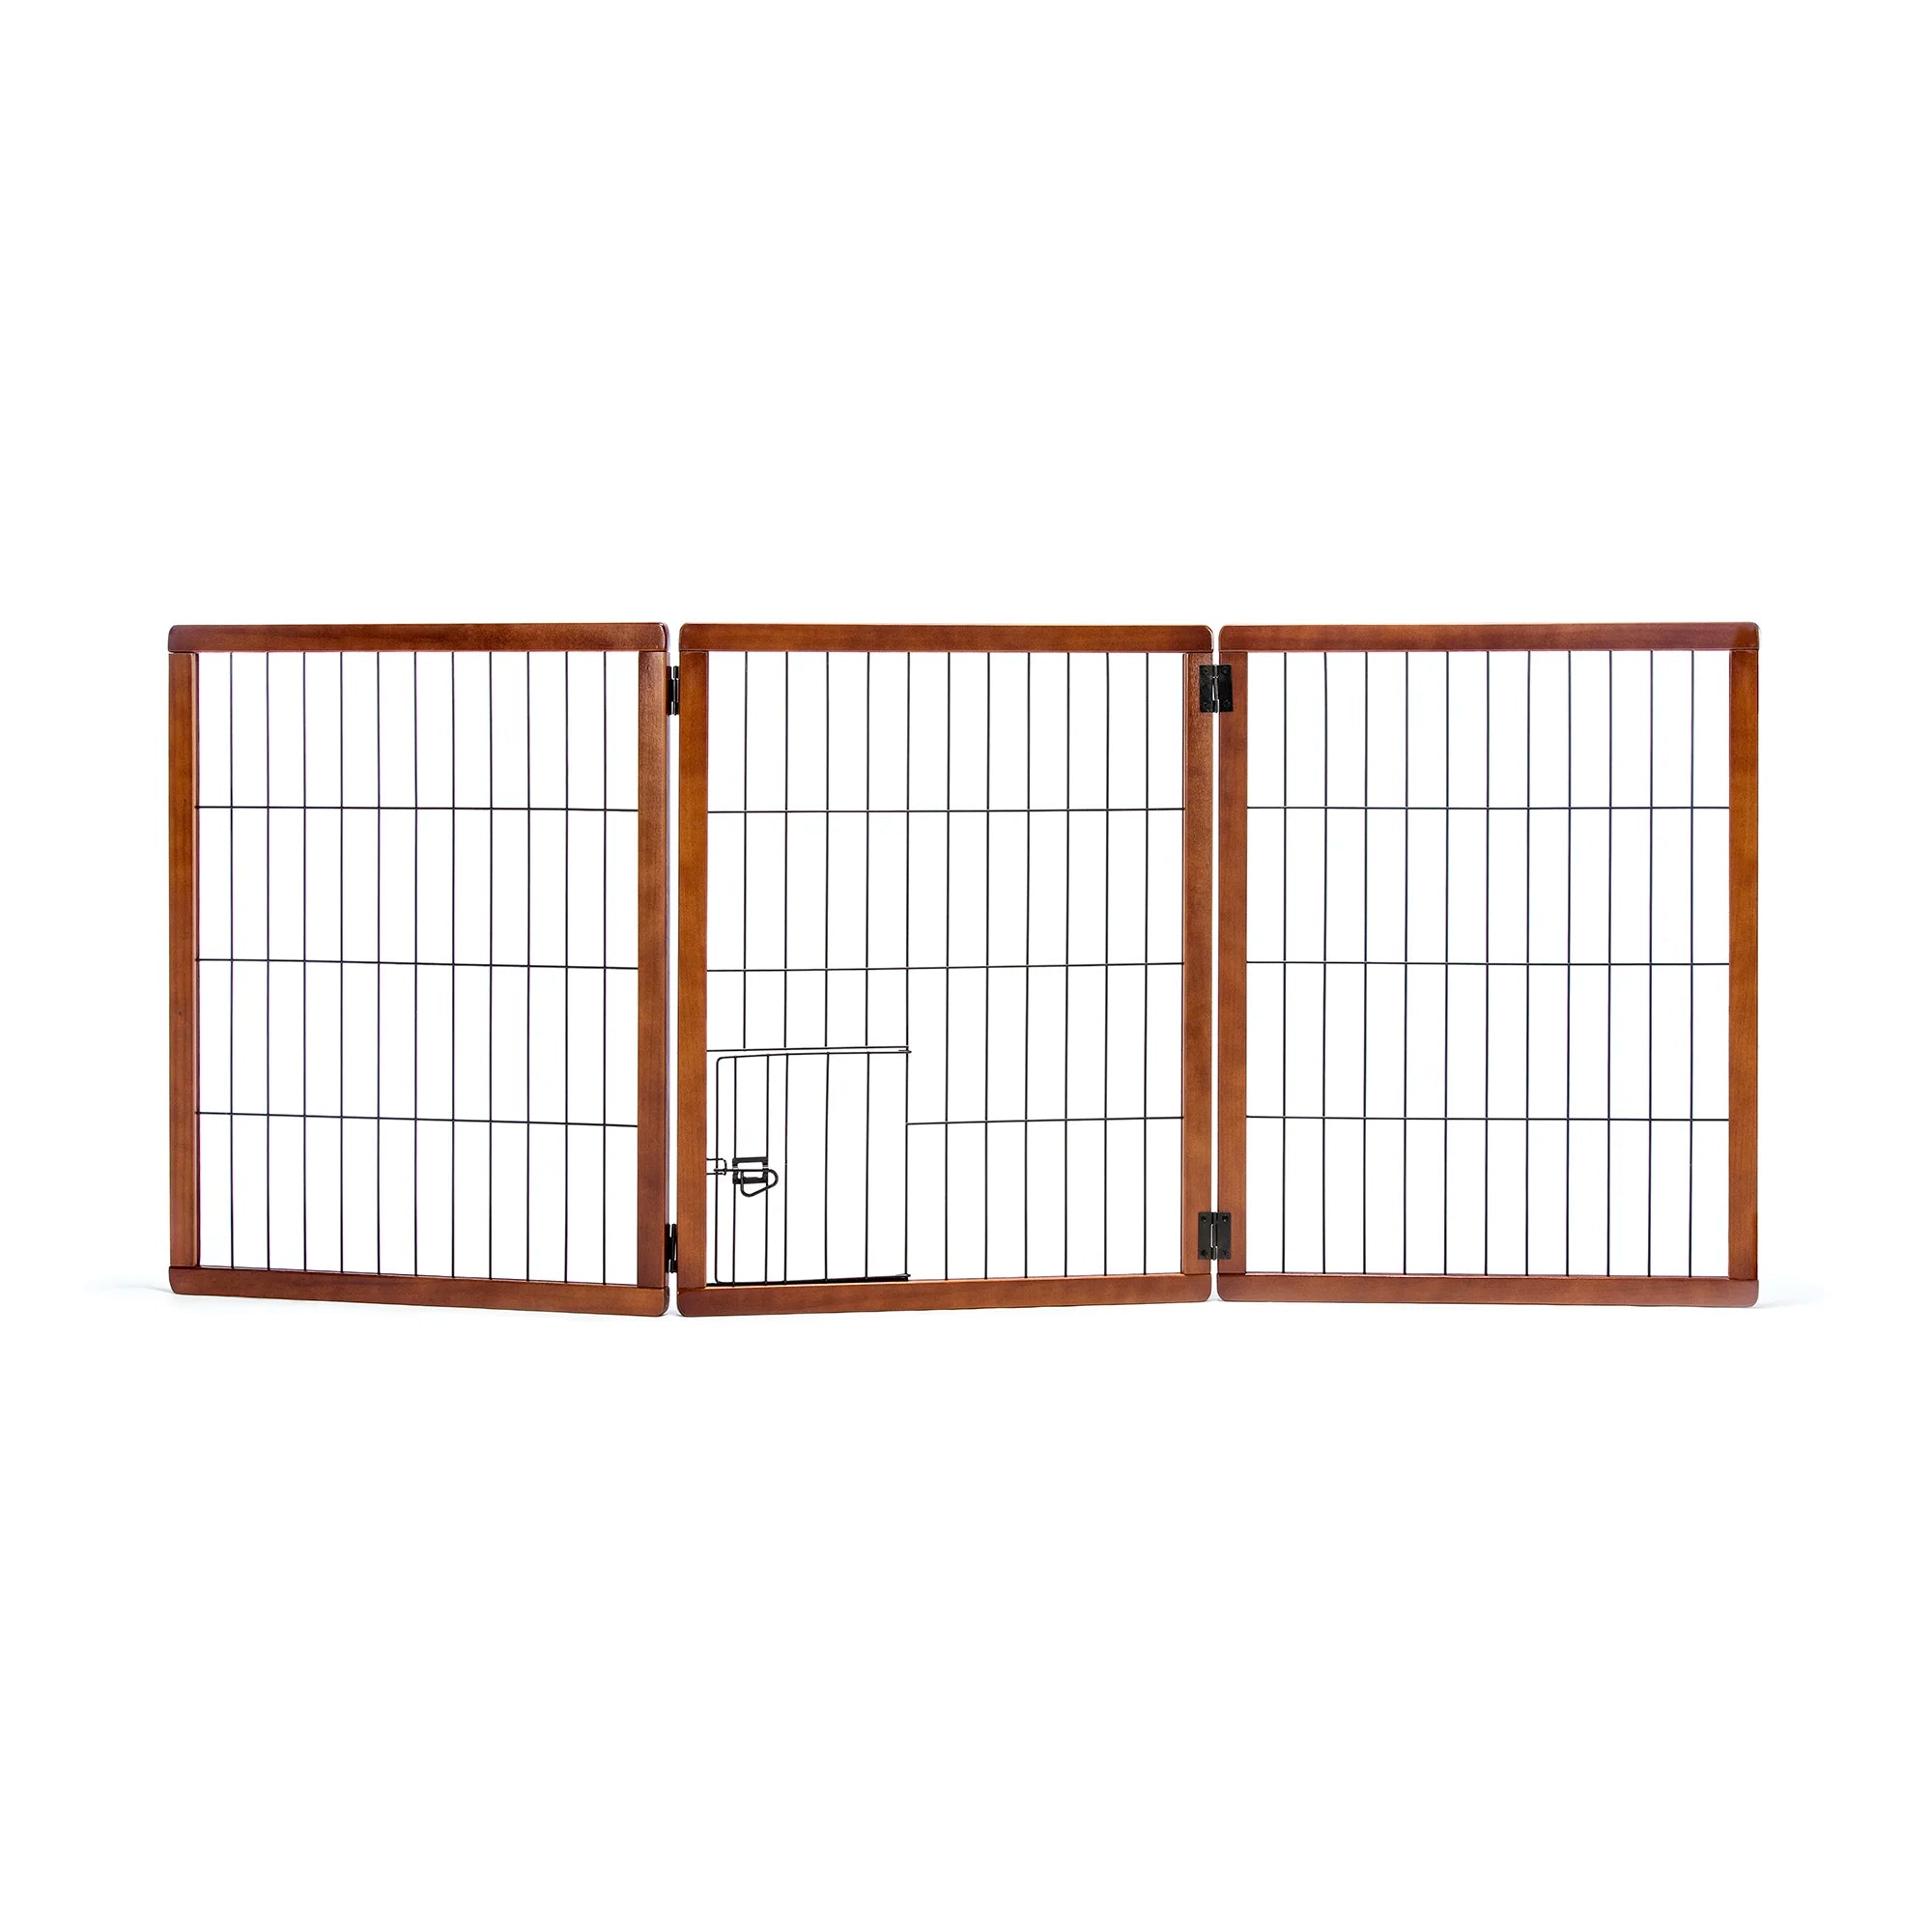 Design Paw Tall 3 Panel Wooden Pet Gate on white background.